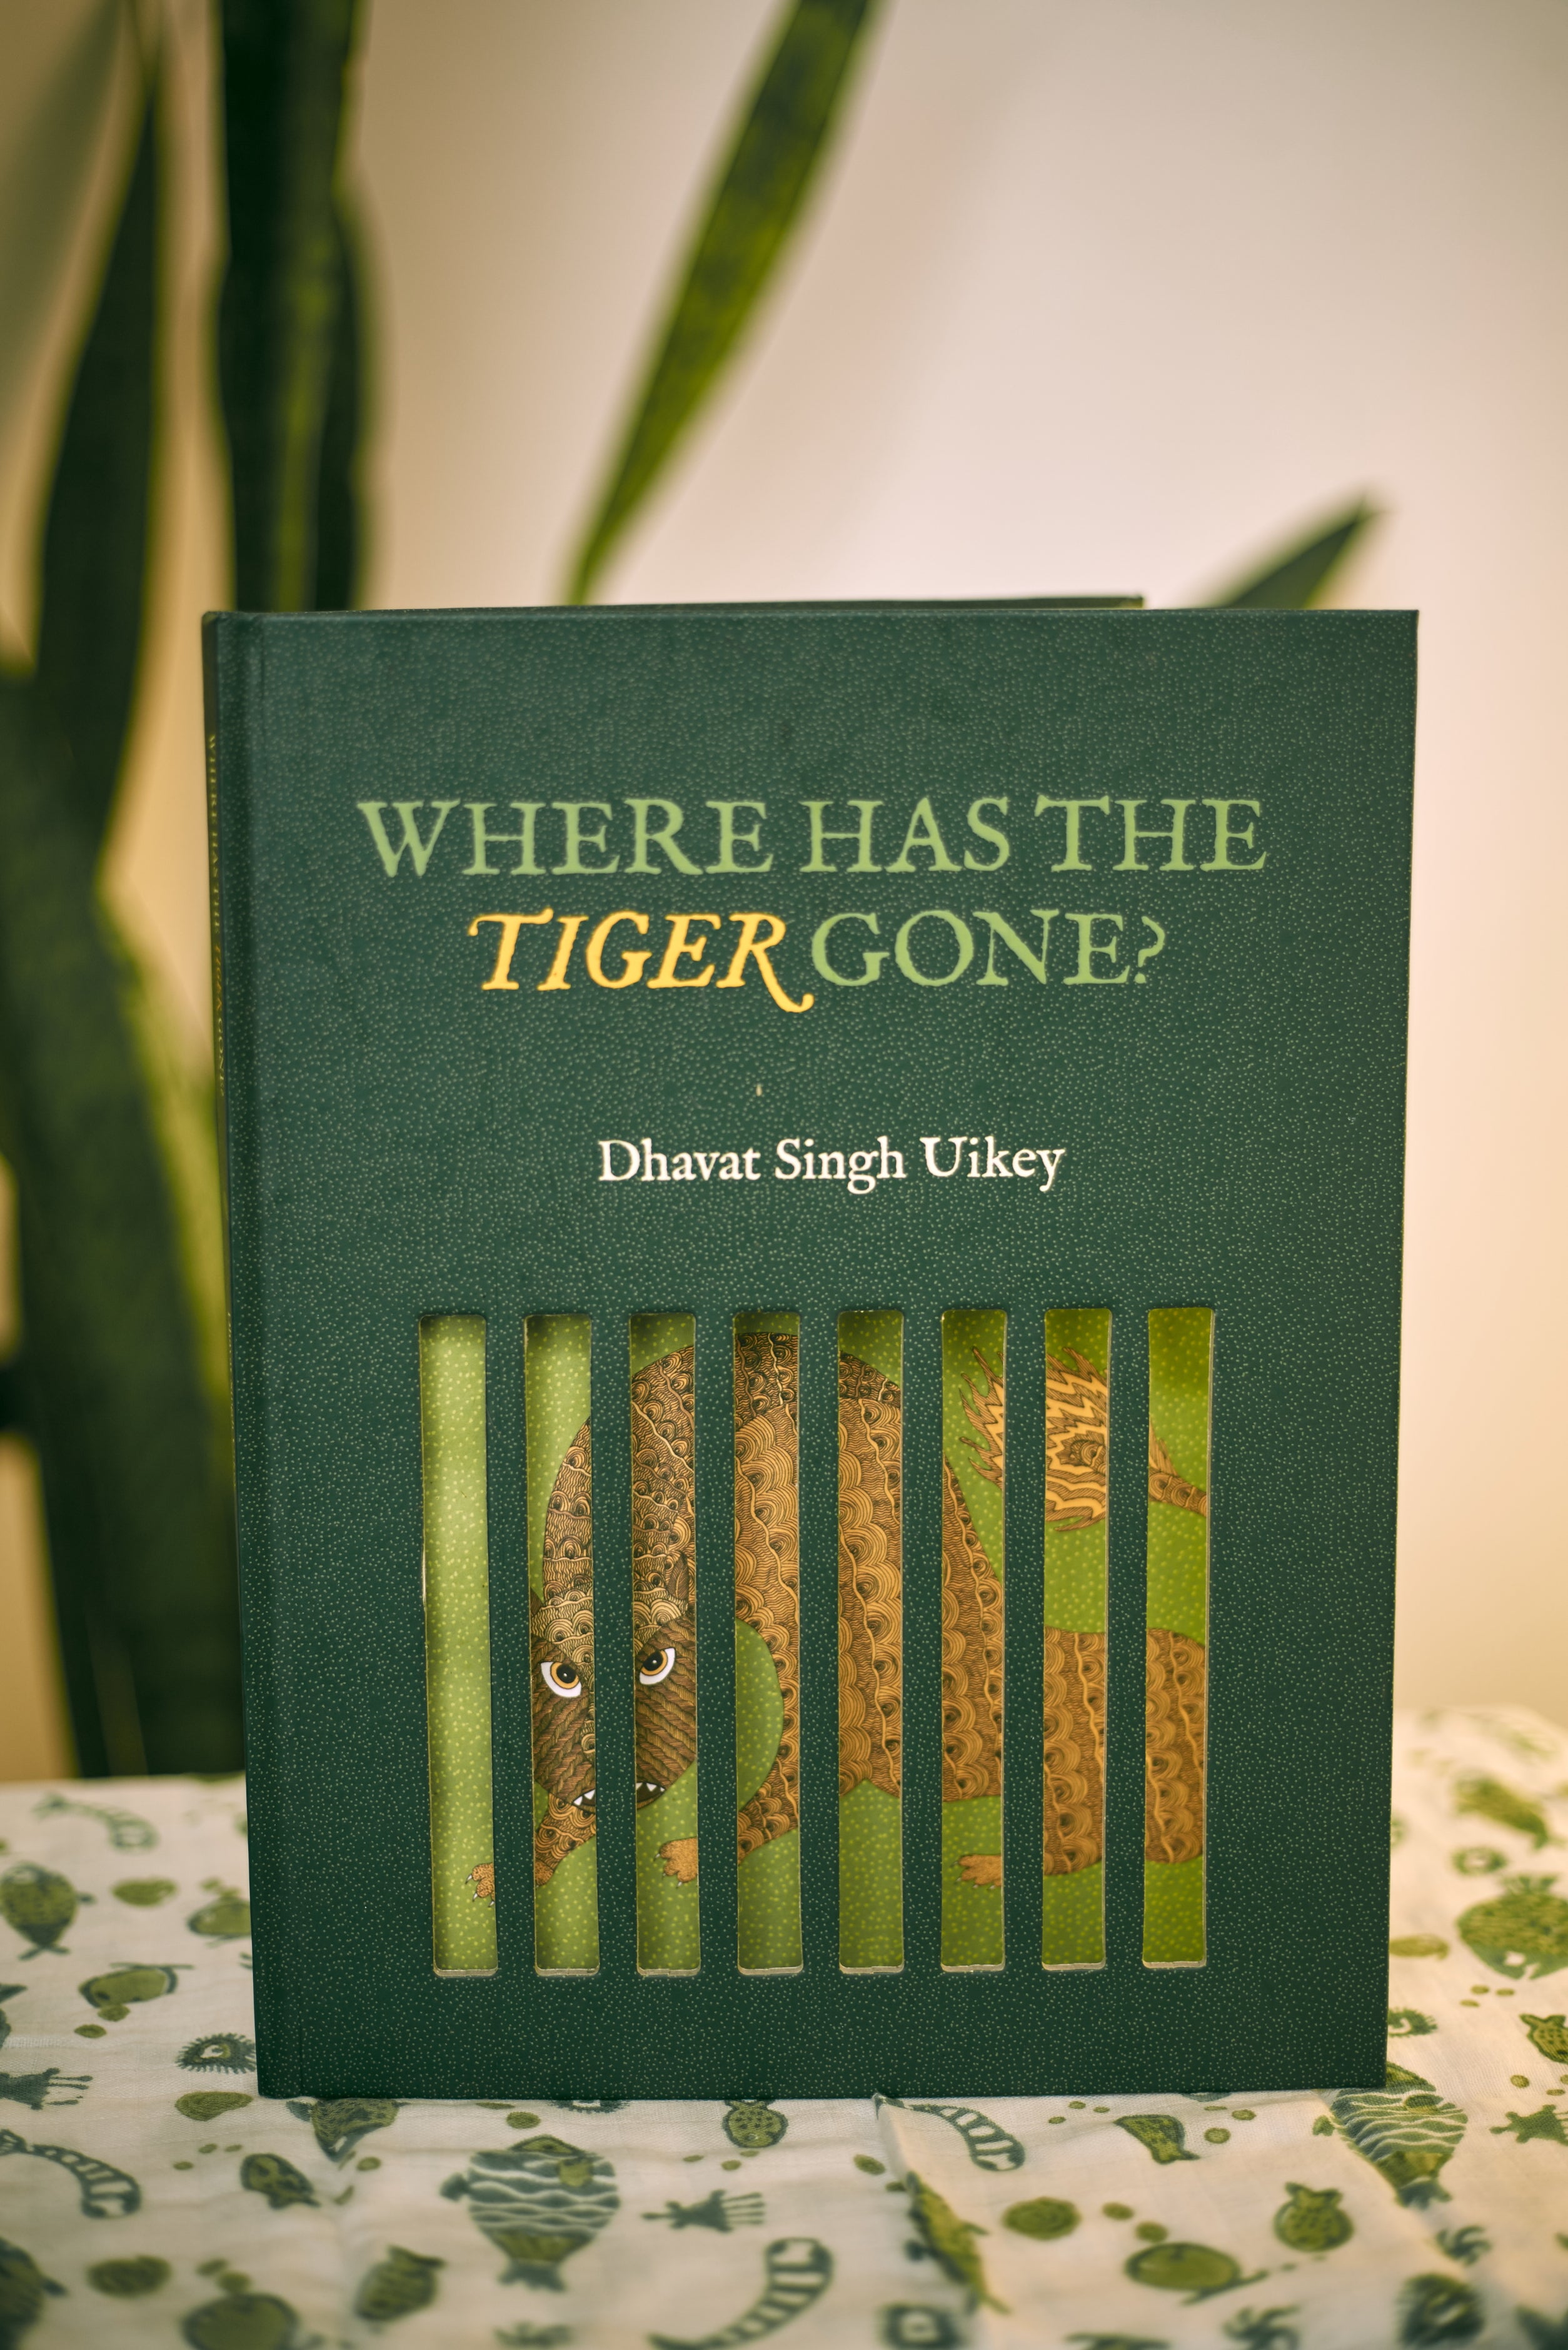 Where Has The Tiger Gone?